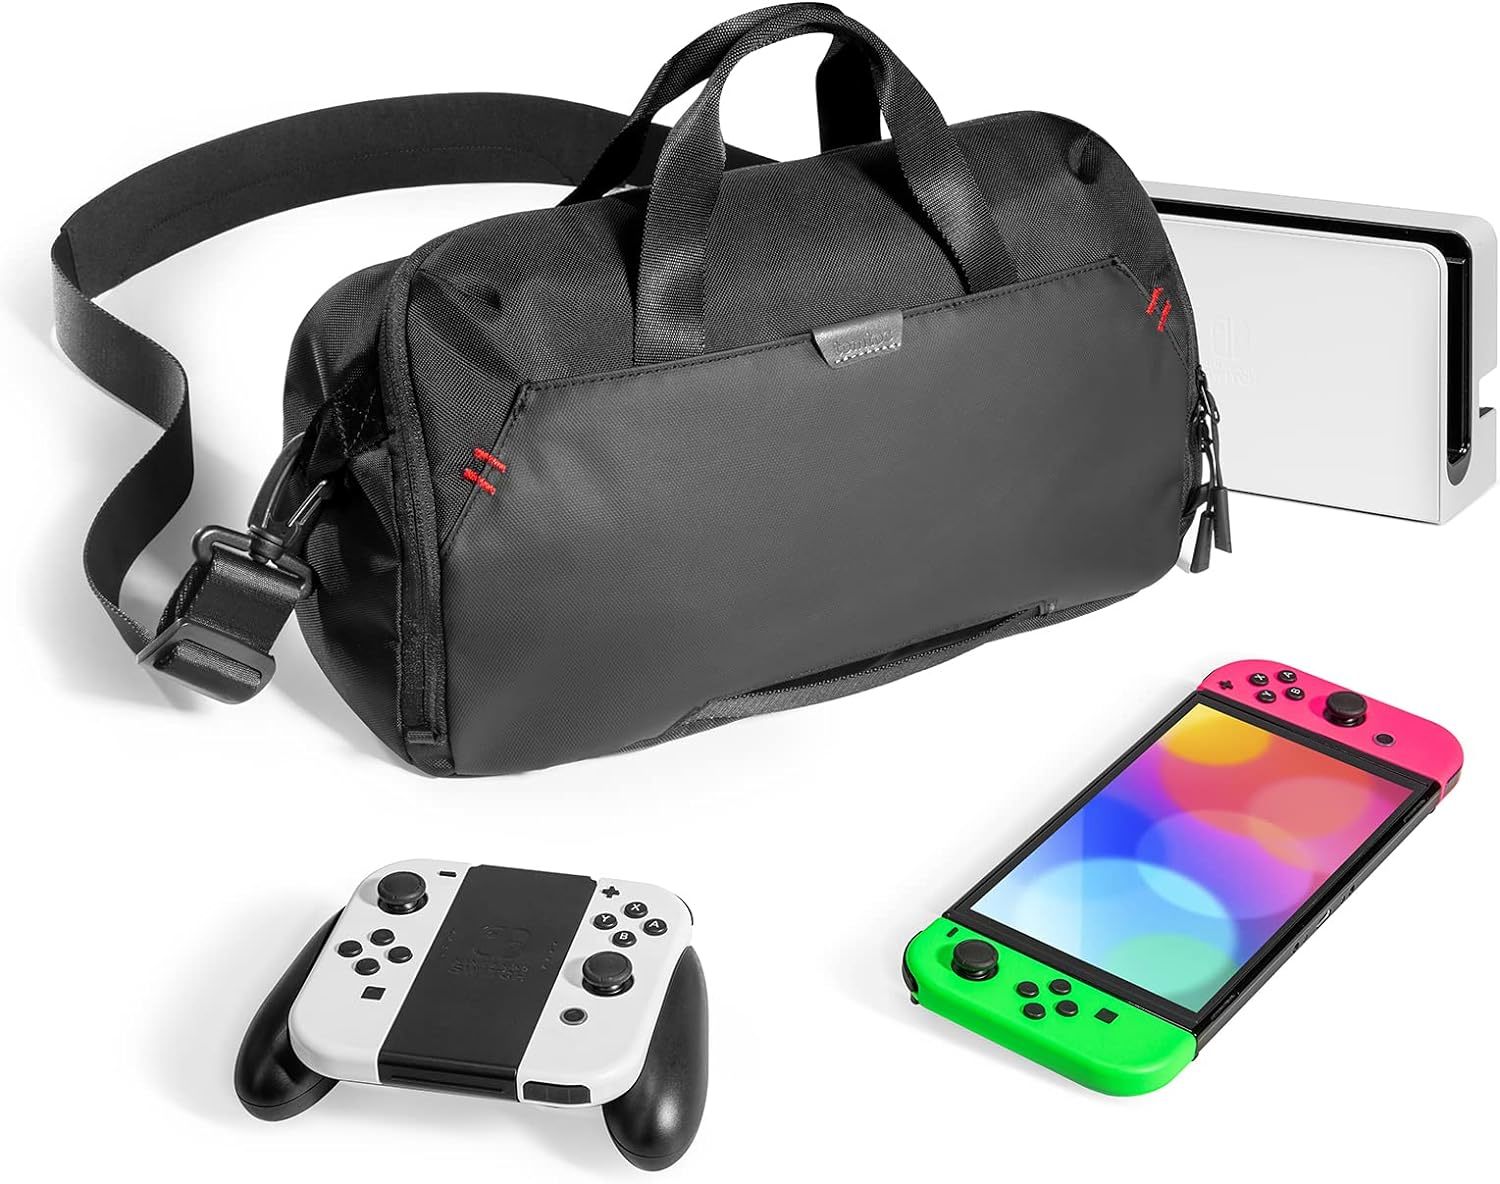 Primary image for Black Tomtoc Carrying Bag For Nintendo Switch Oled And Nintendo Switch,